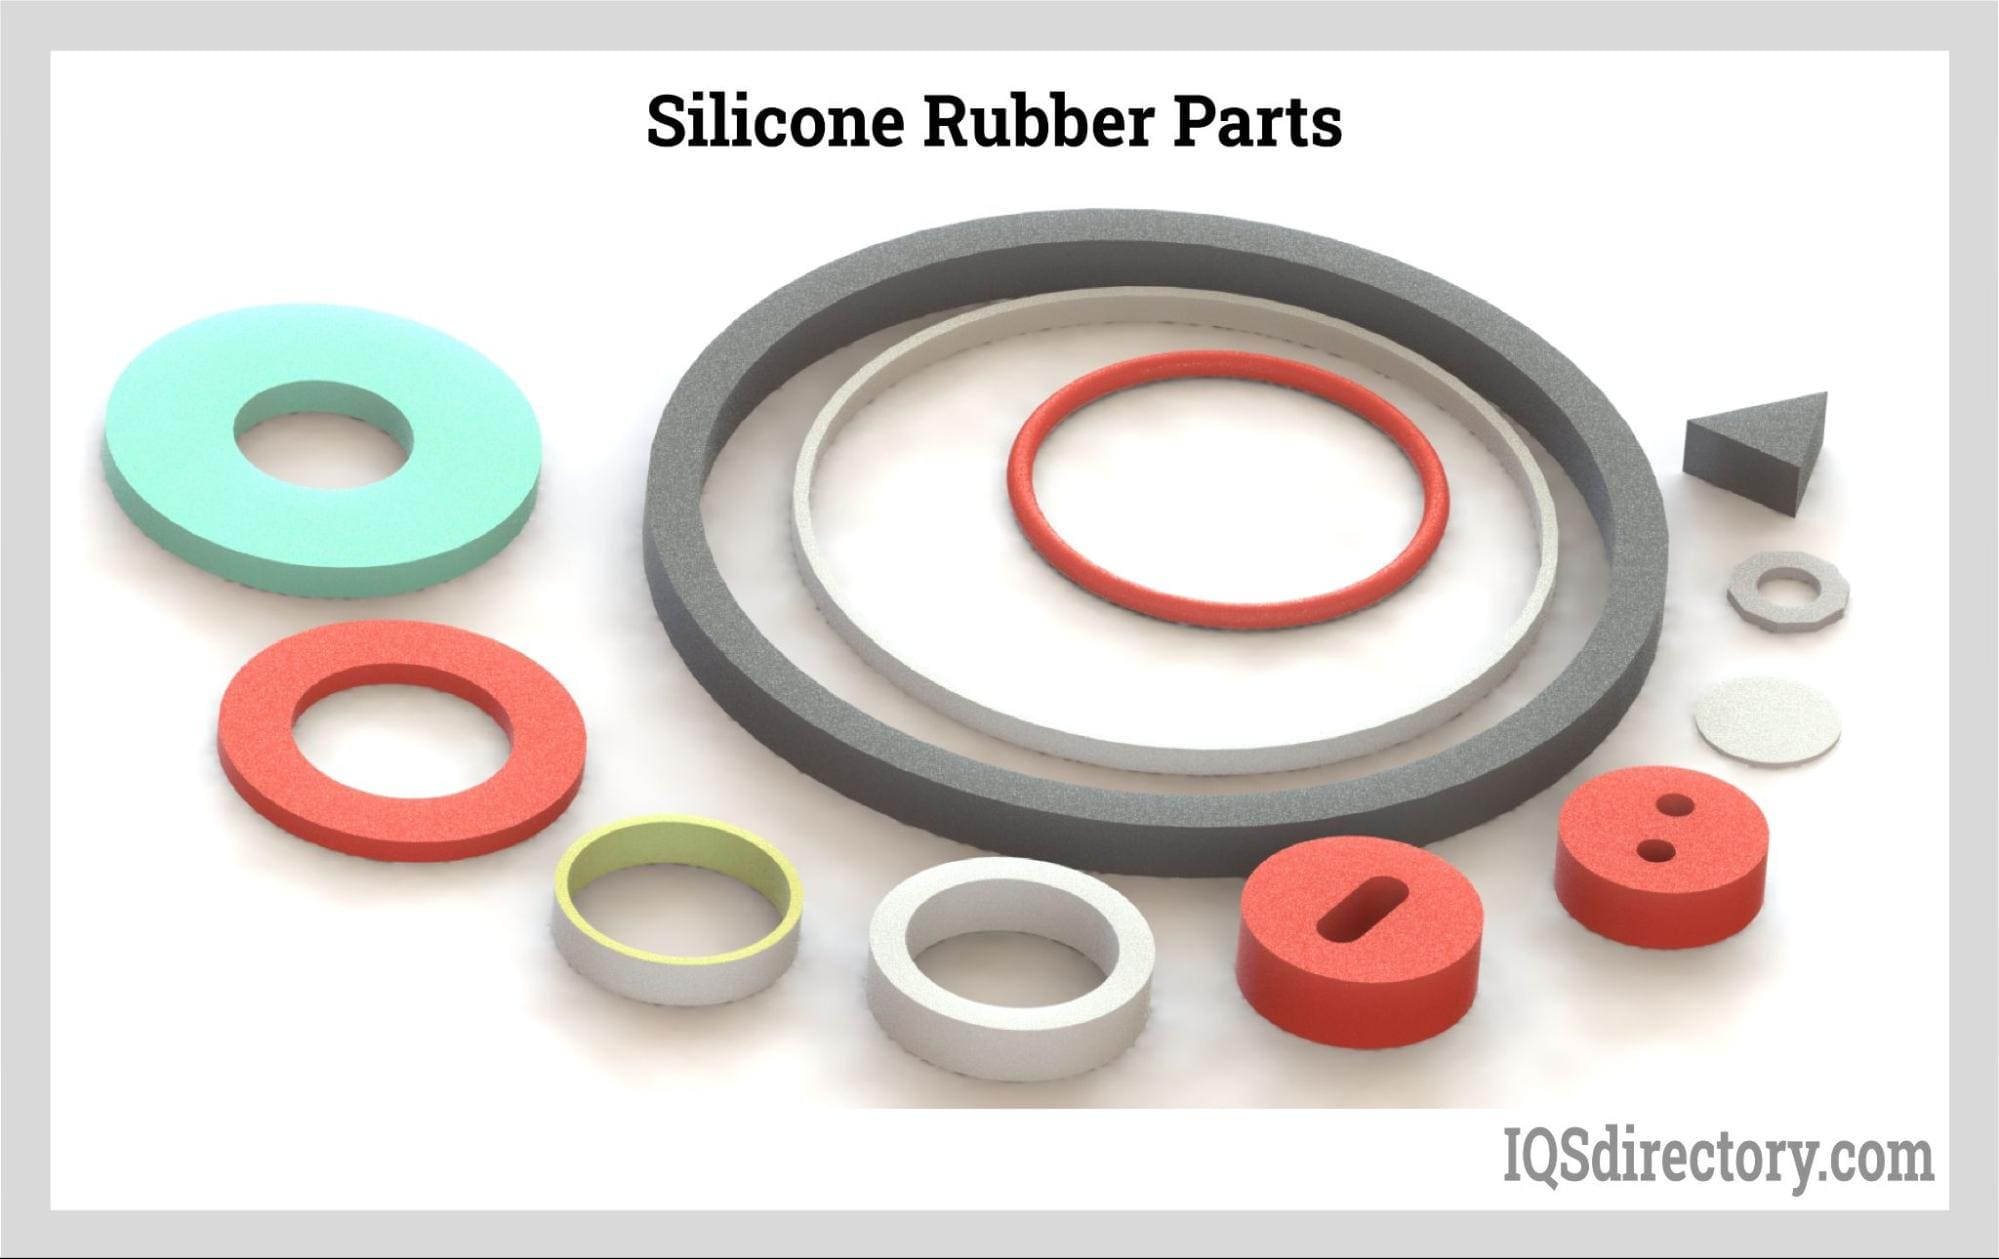 Should I Use Polyurethane Mold Rubber or Silicone Mold Rubber